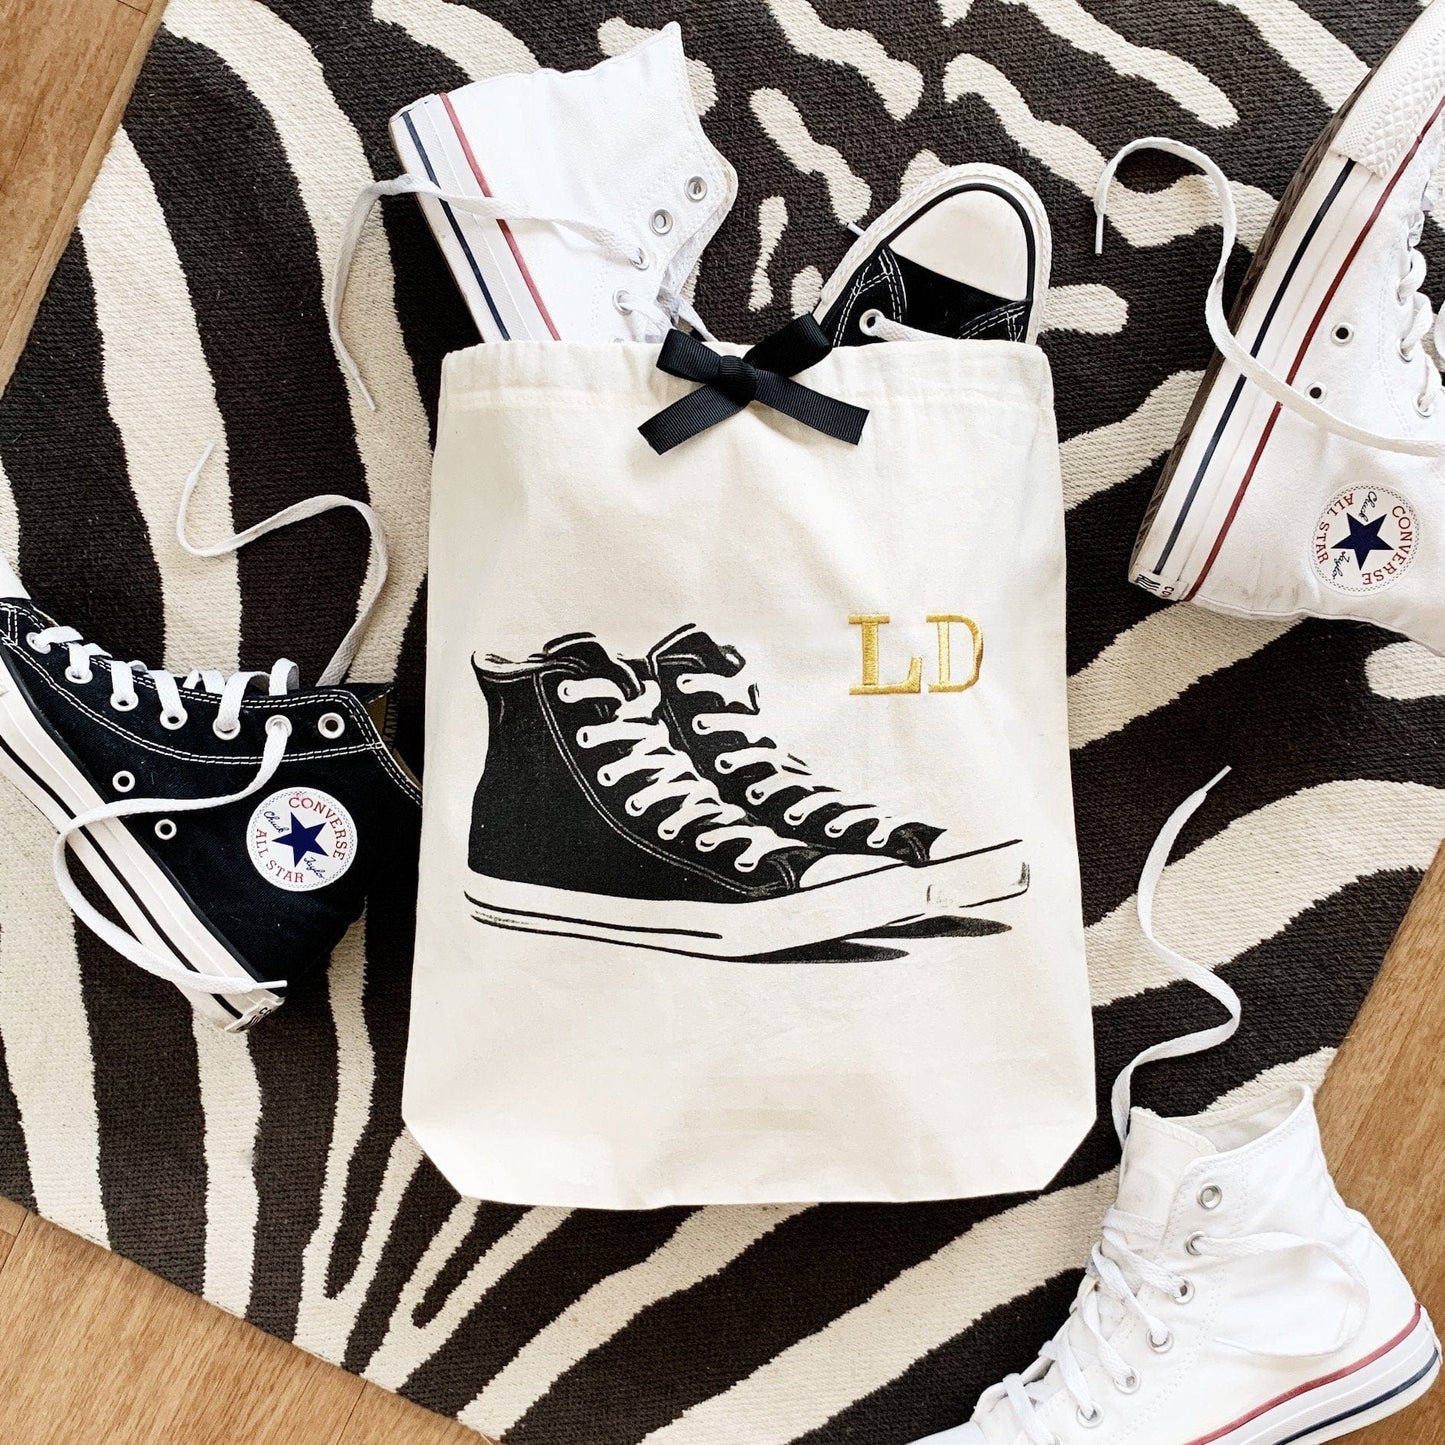 Sneakers Shoe Bag "LD" monogrammed on front, white and black converse, zebra rug